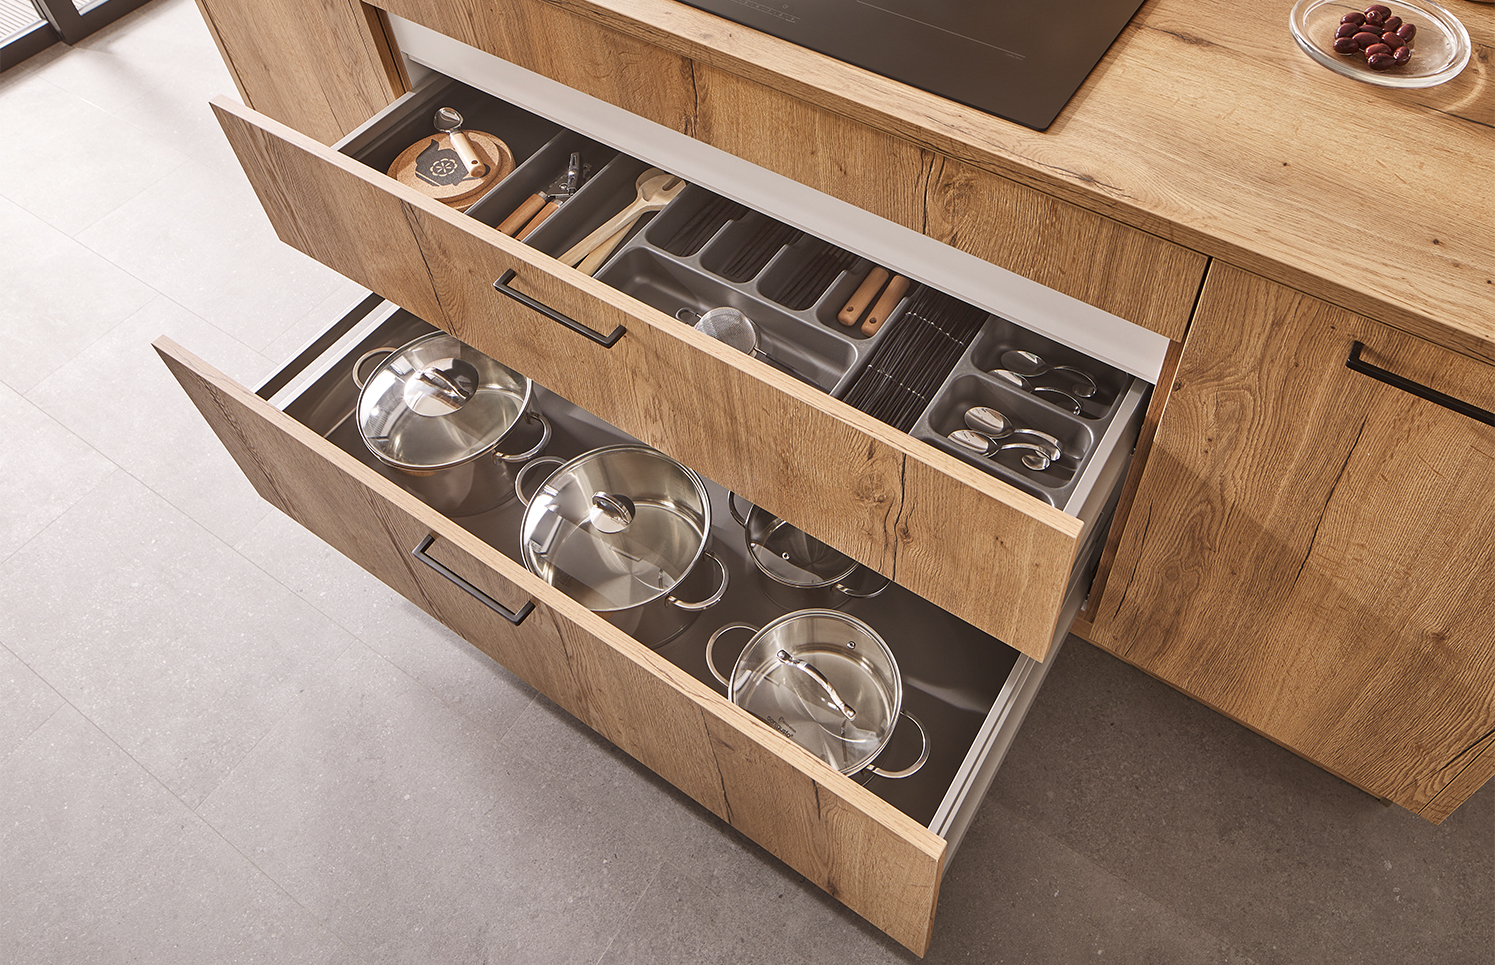 drawers with kitchen appliances